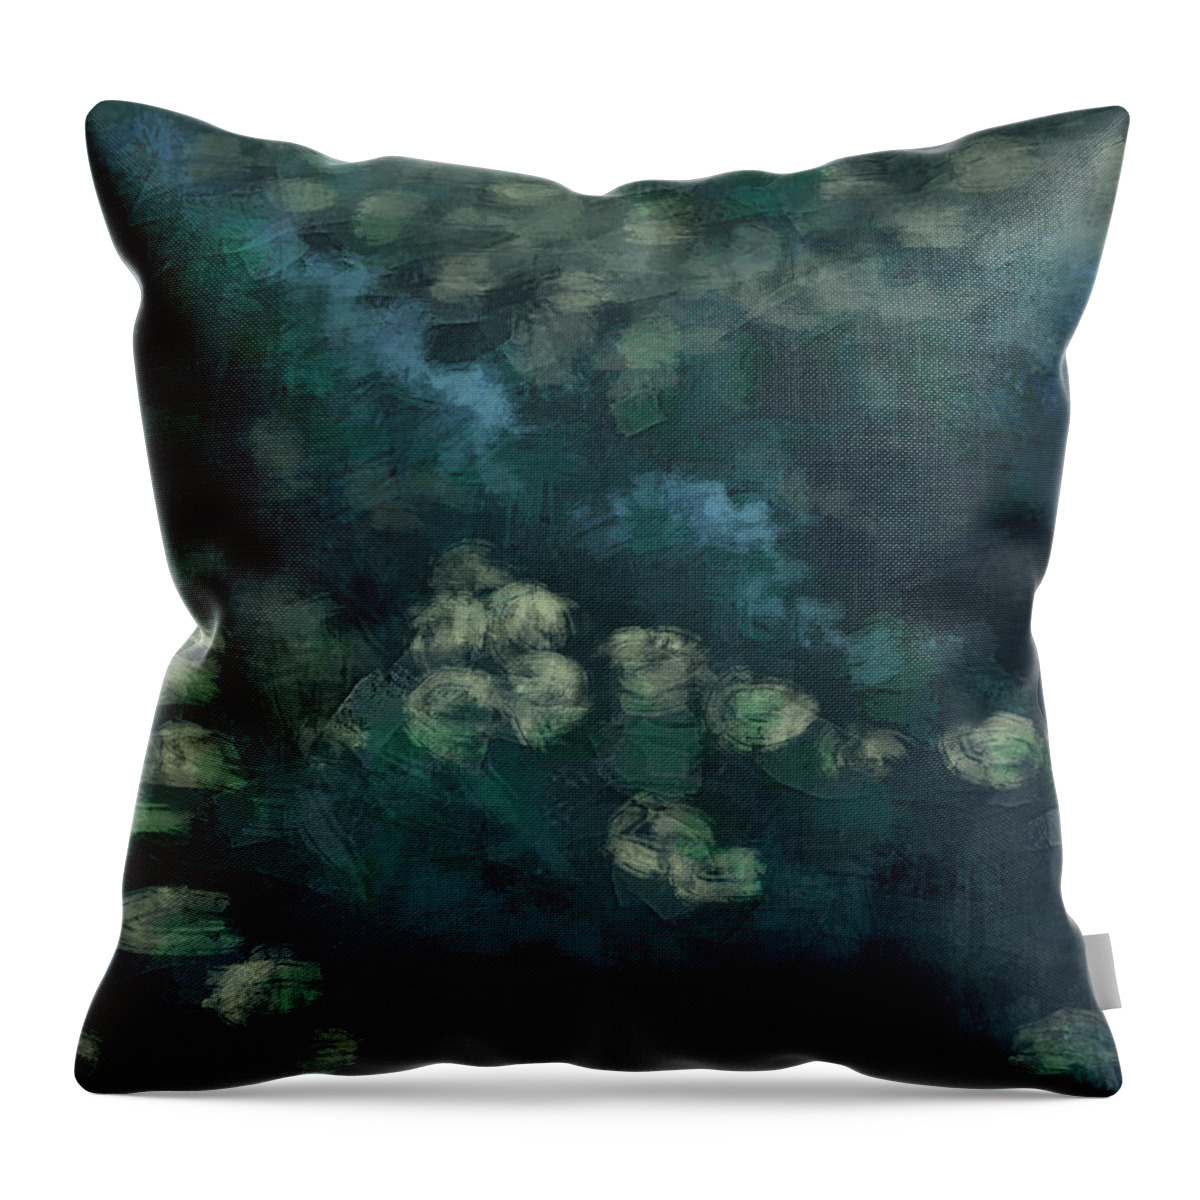  Waterlilies Waterlily Impresionism Expresionism Abstract Waterpound Lanscape Inerlanscape Personalfeelings �rstedsparken Copenhagen Throw Pillow featuring the digital art Water Lilies by M A Ibanez